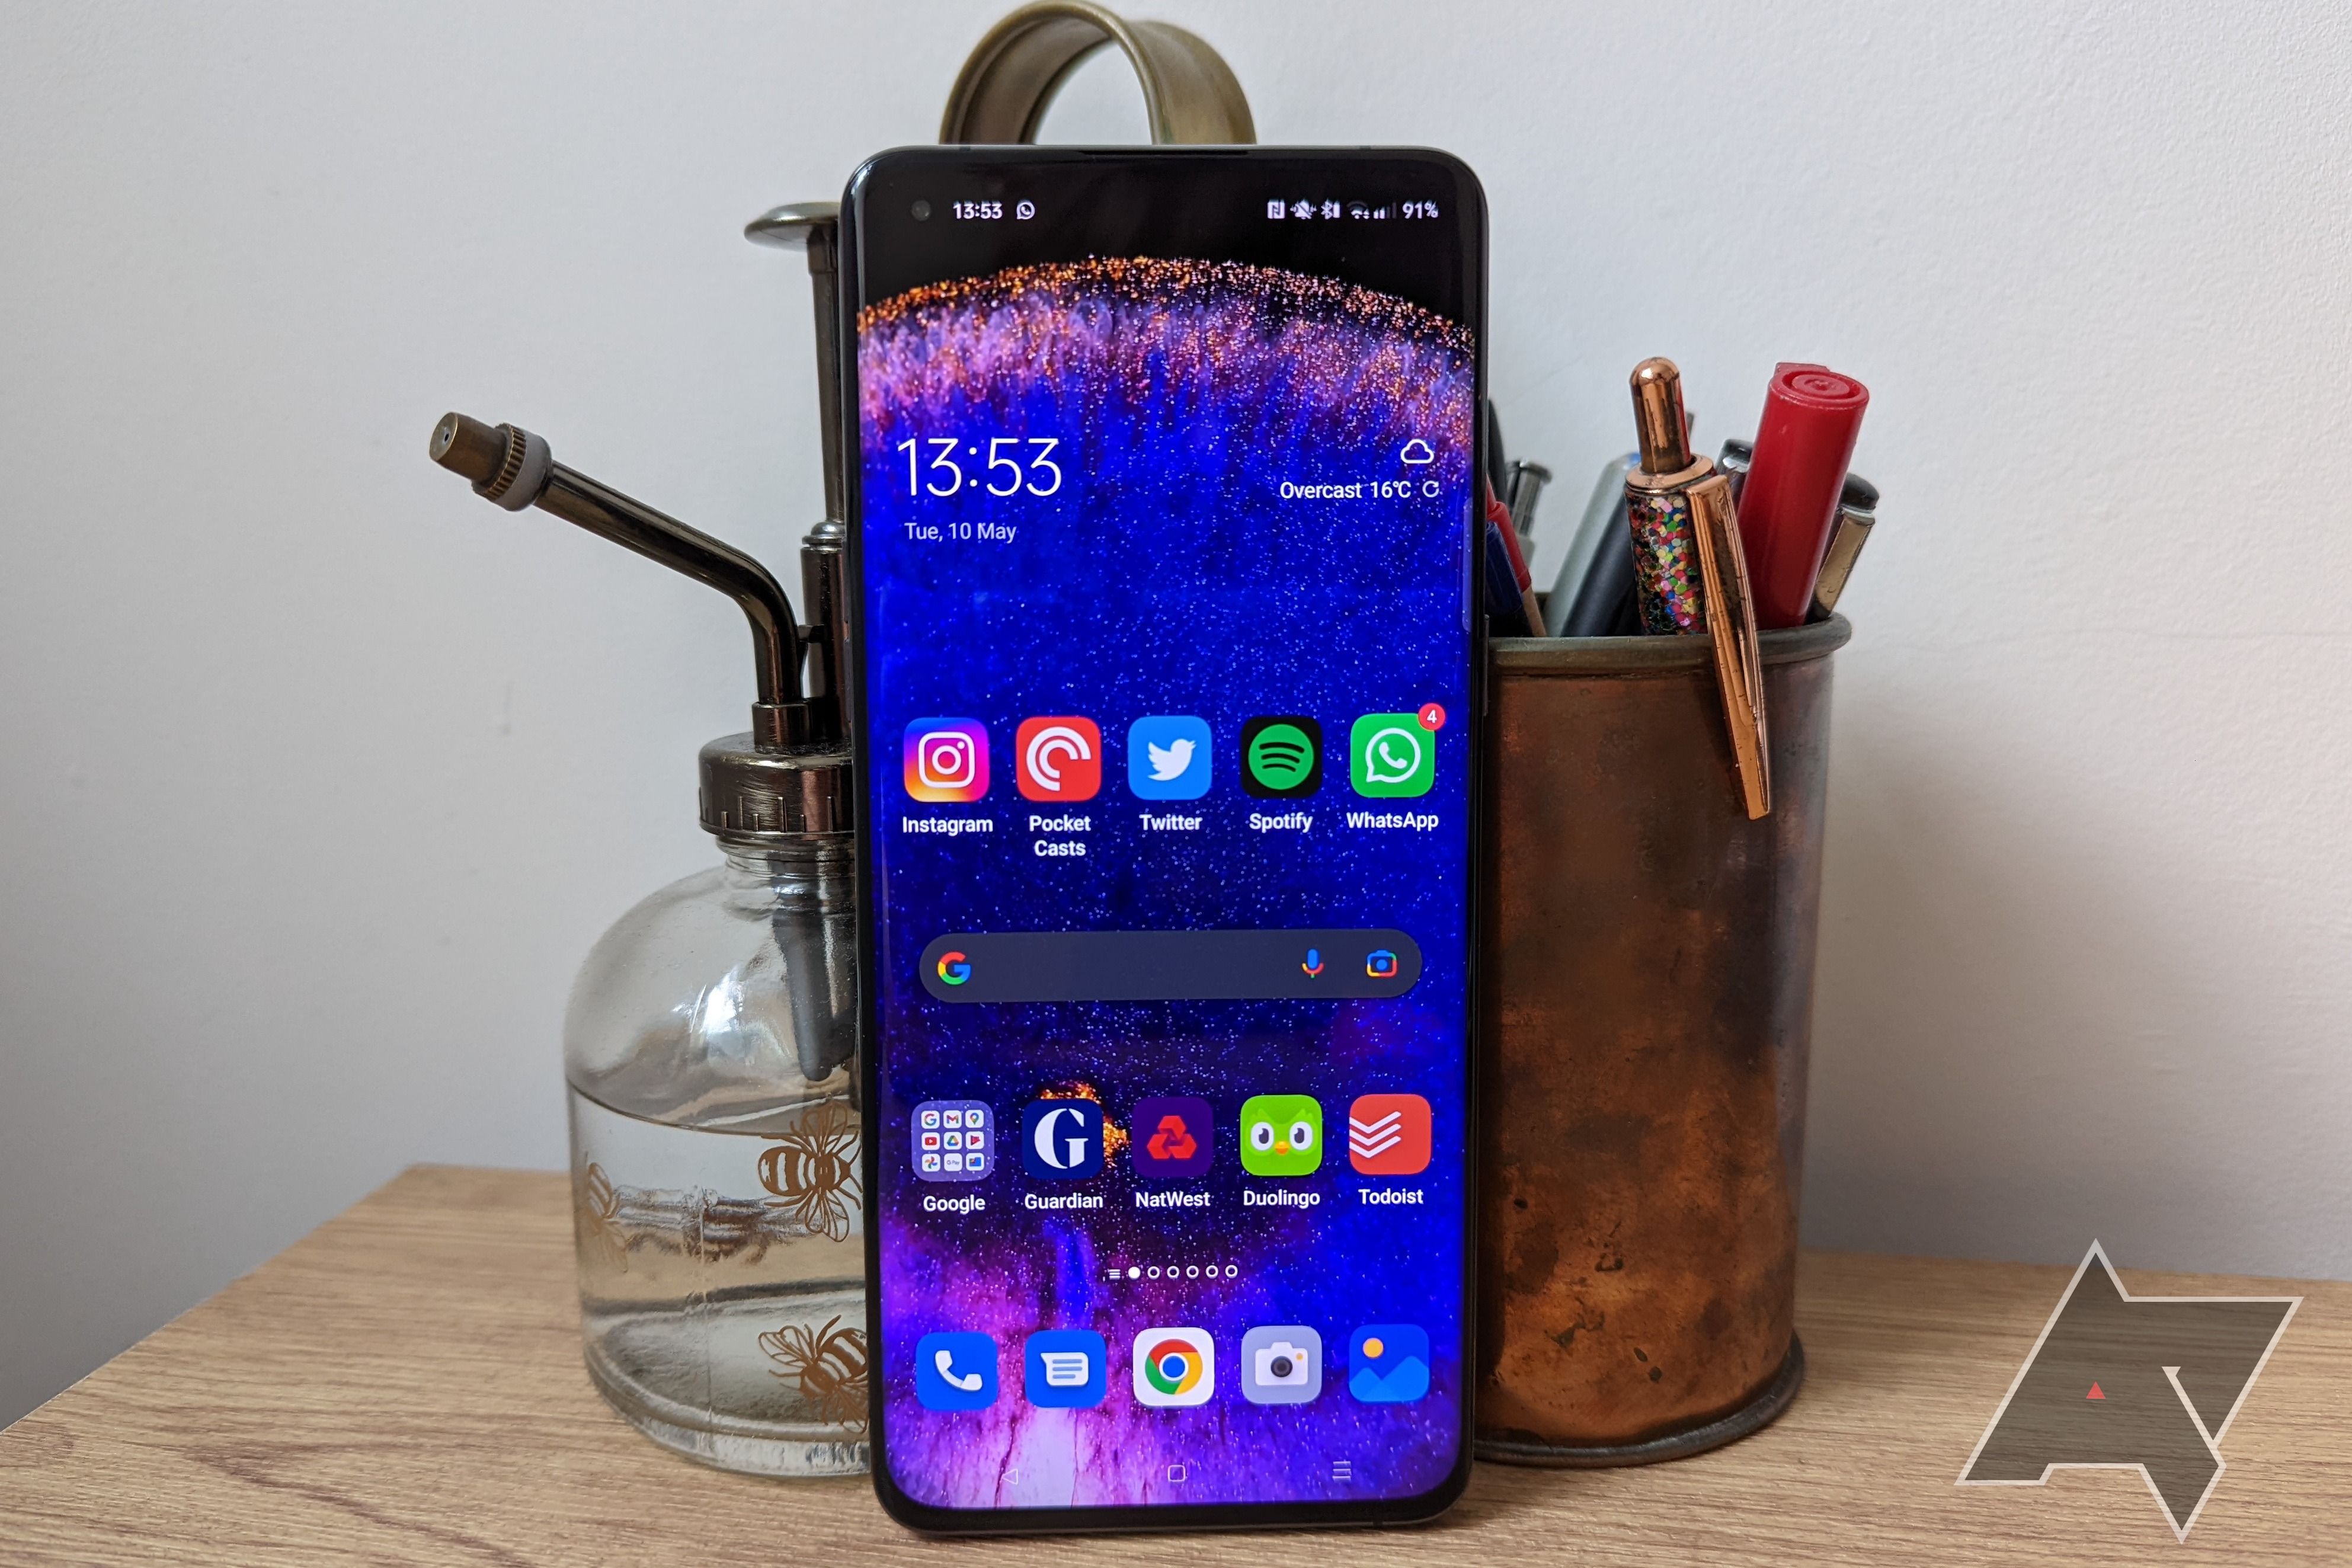 Oppo Find X5 Pro Smartphone review